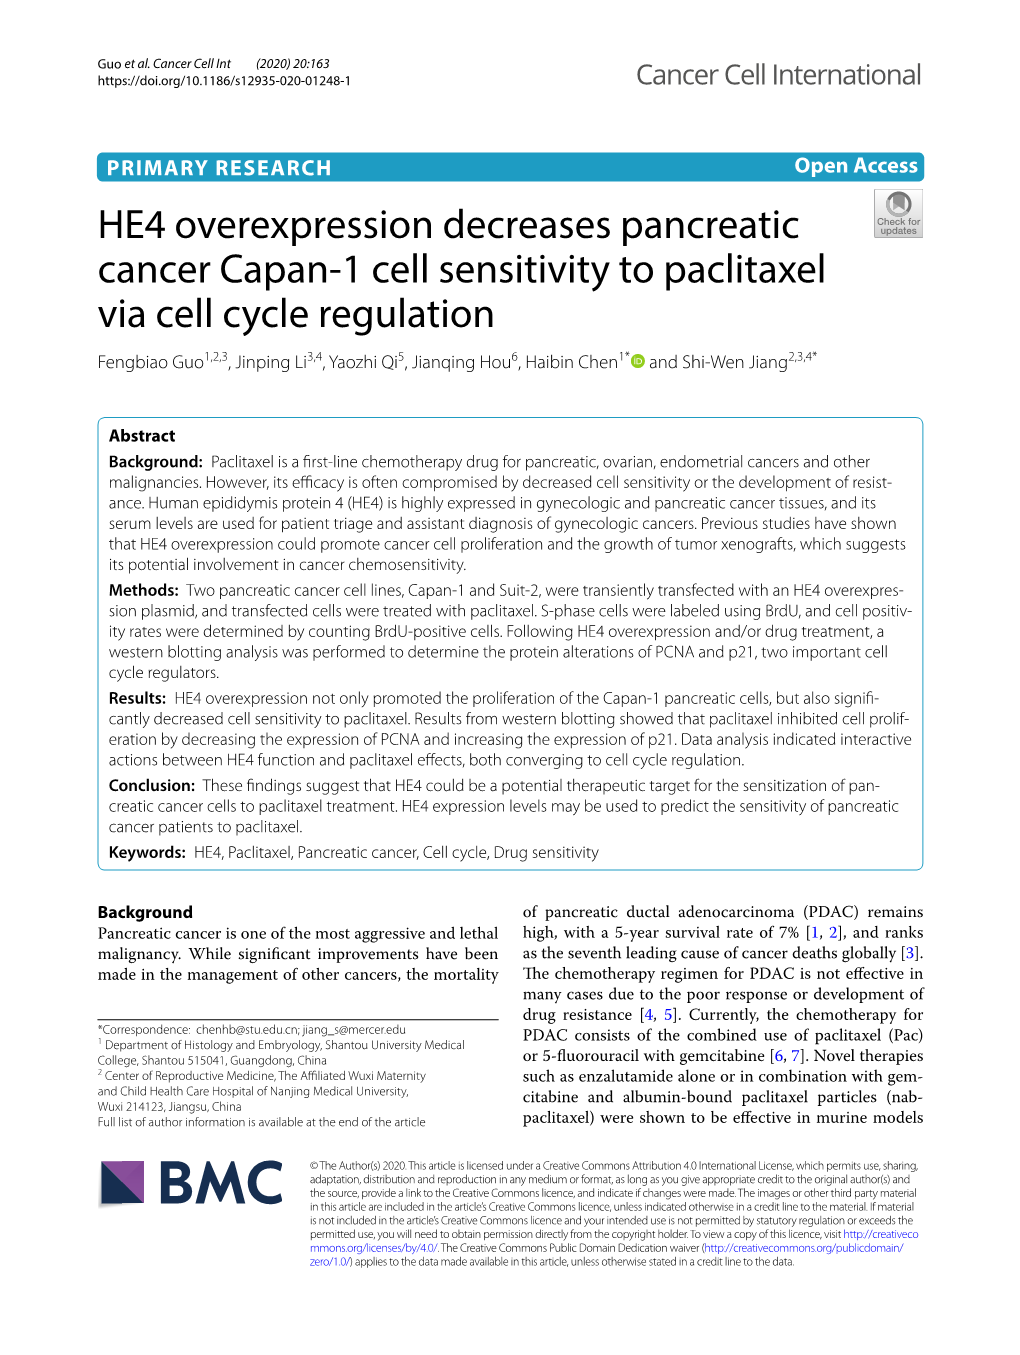 HE4 Overexpression Decreases Pancreatic Cancer Capan-1 Cell